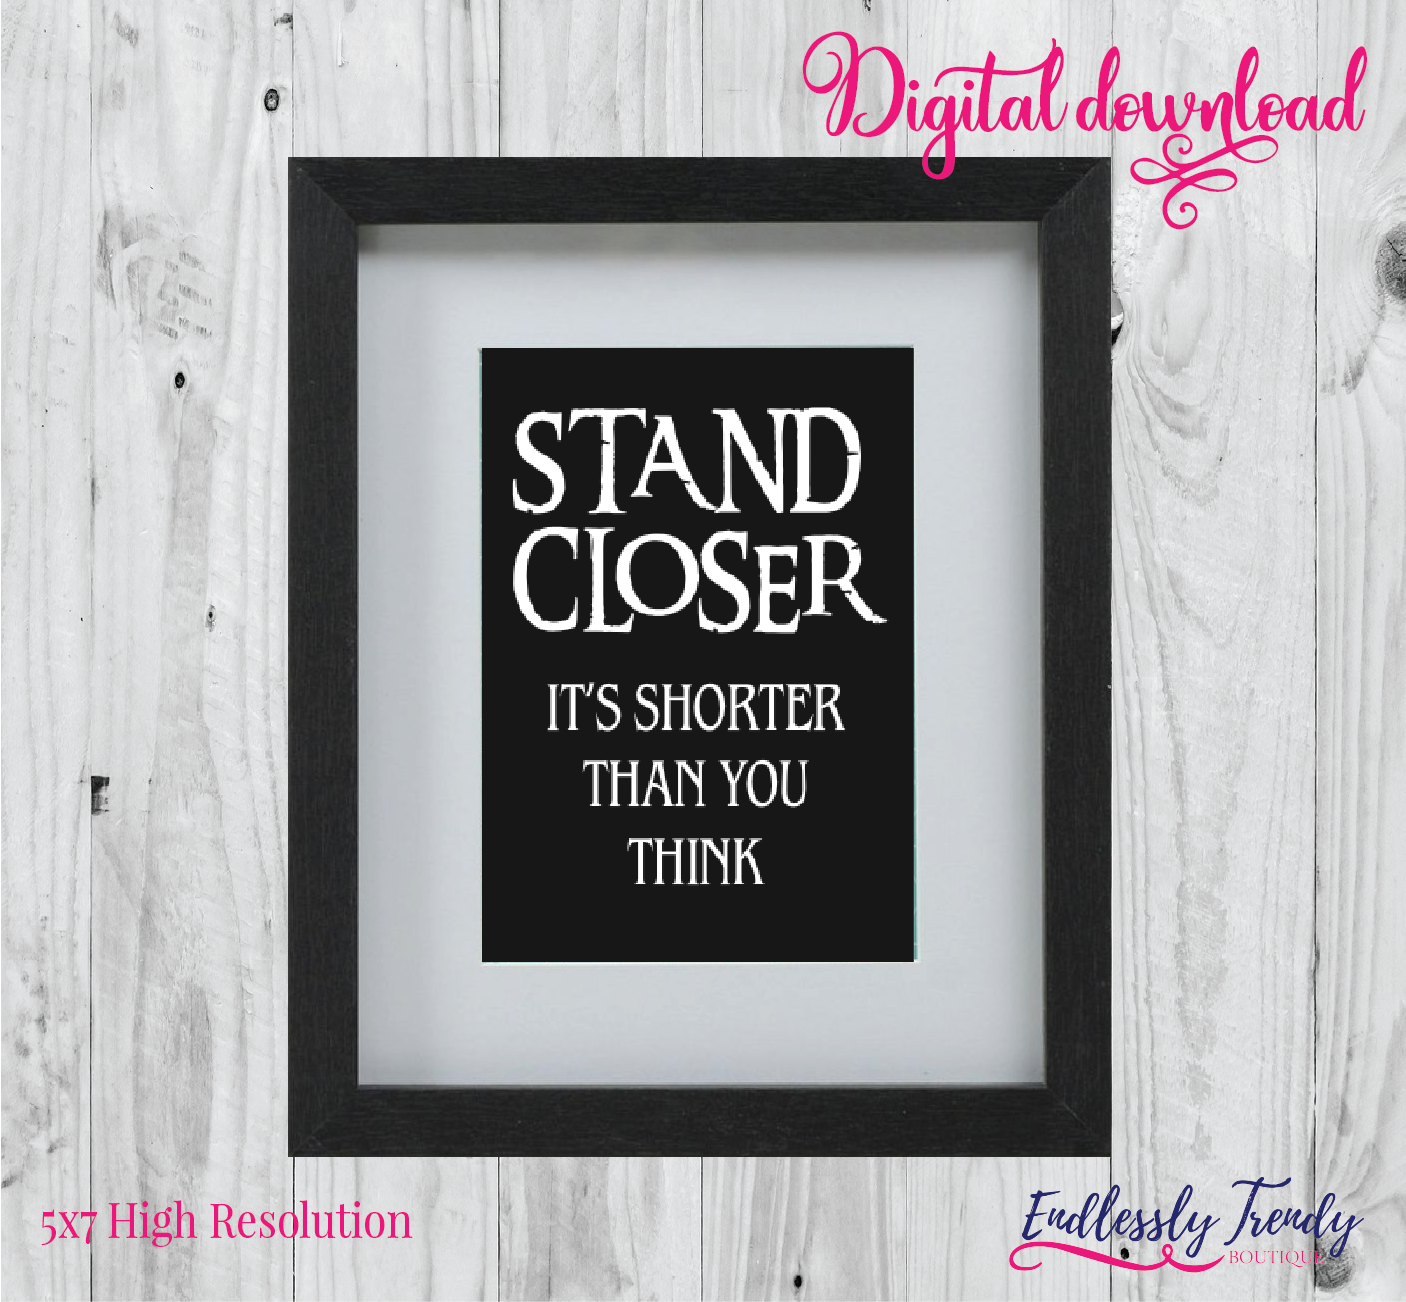 8" x 10" Stand Closer It's Shorter Than You Think - Bathroom Humor Quote - Digital Download - Printable Digital File - - Endlessly Trendy Boutique